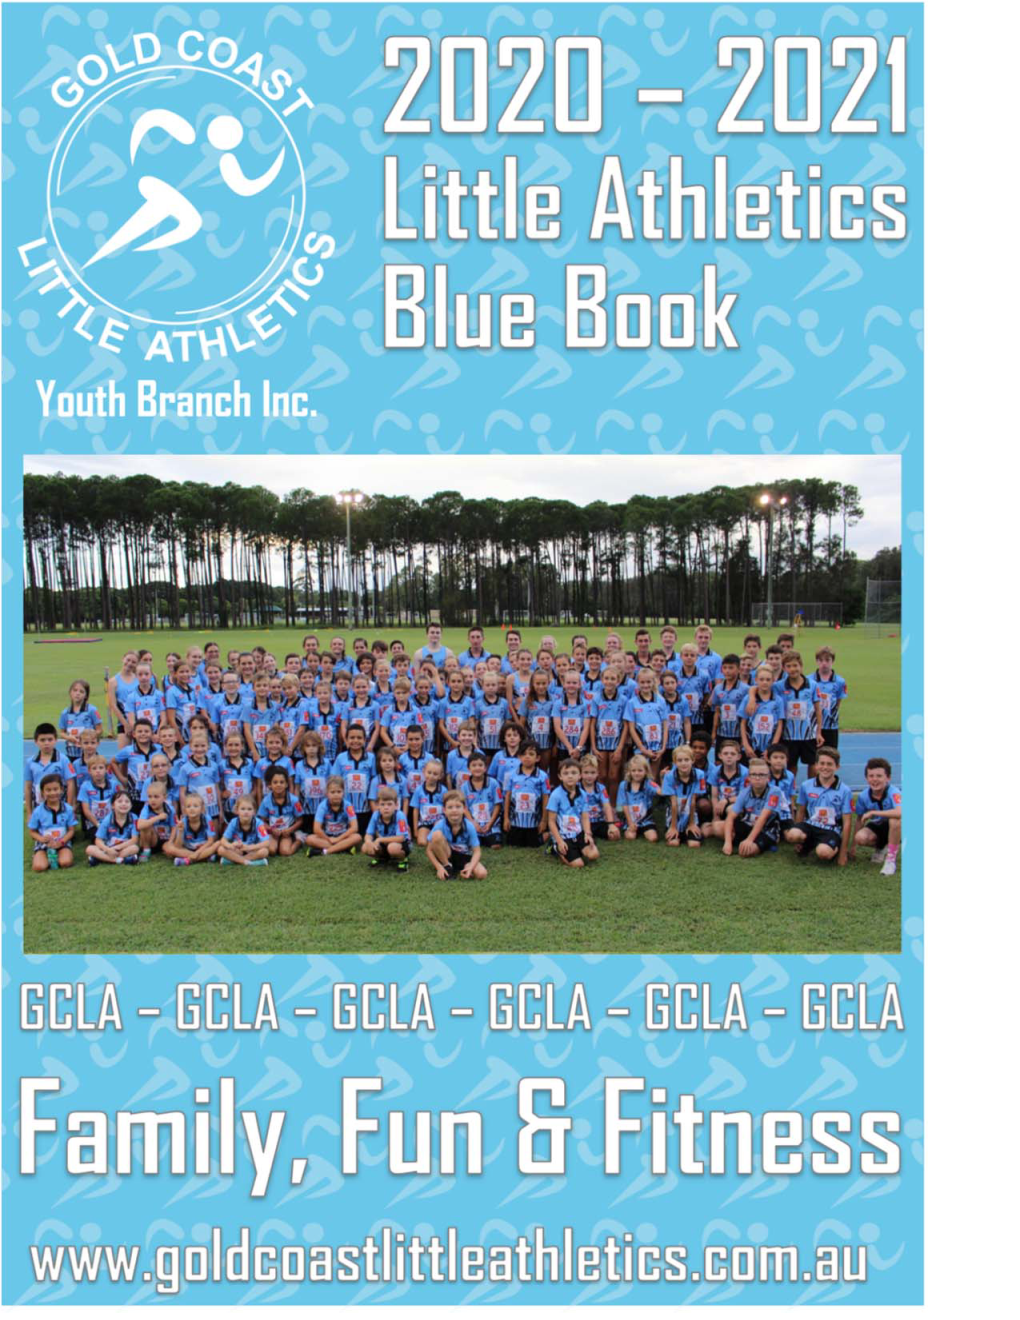 Download Our Blue Book